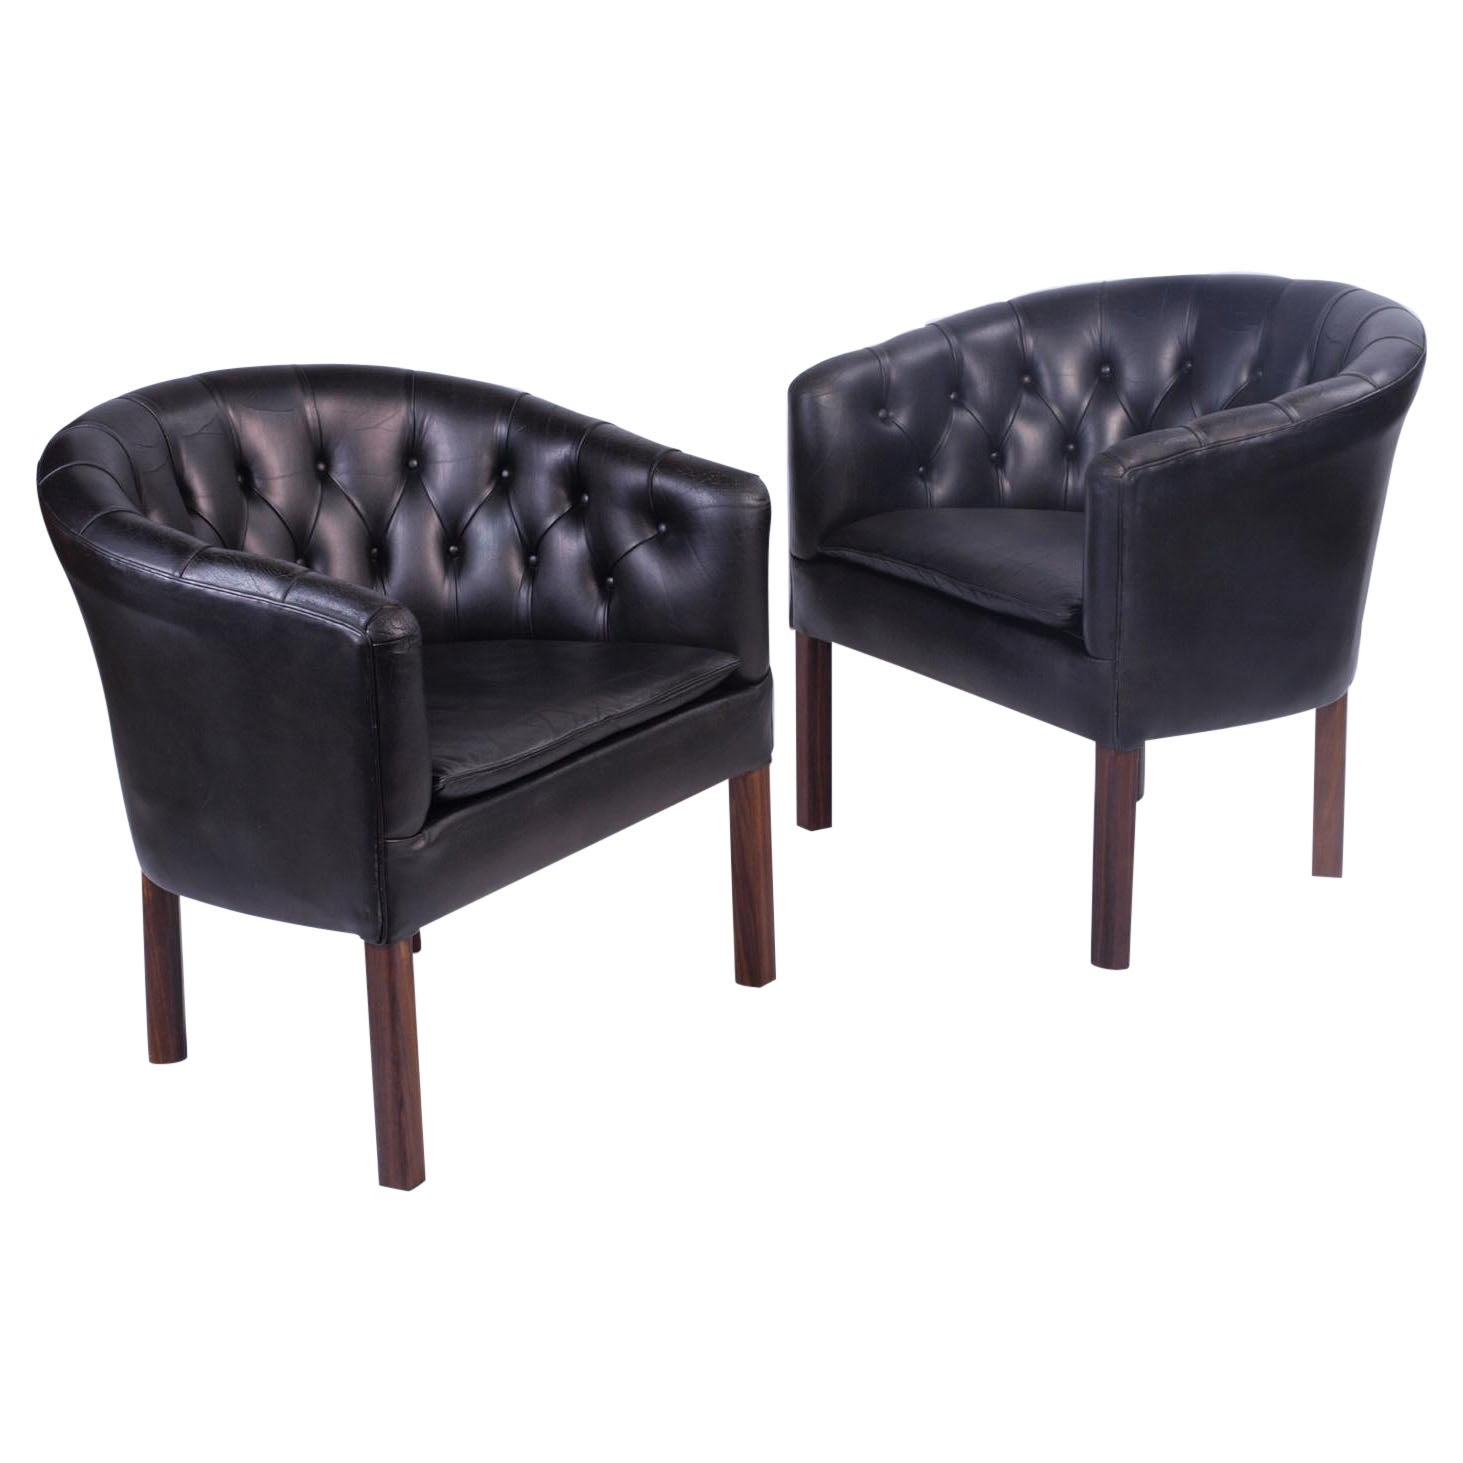 Leather Danish Lounge Chairs Attributed to Kaare Klint, Borge Mogensen